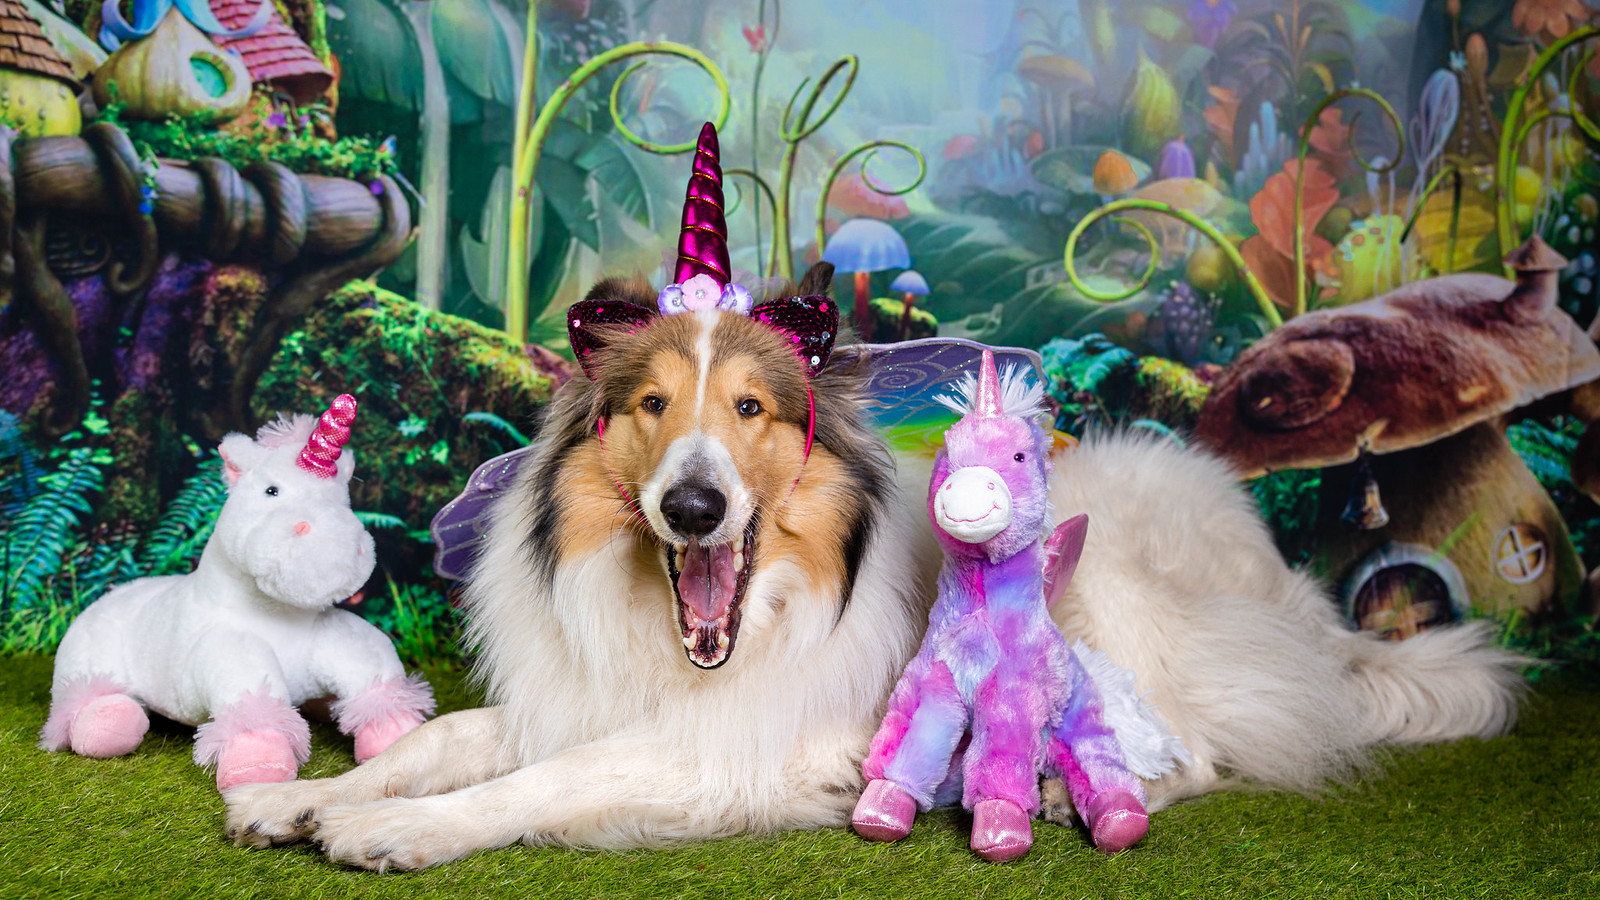 Miss Morgan has found the perfect disguise, no-one will find her among these unicorns.